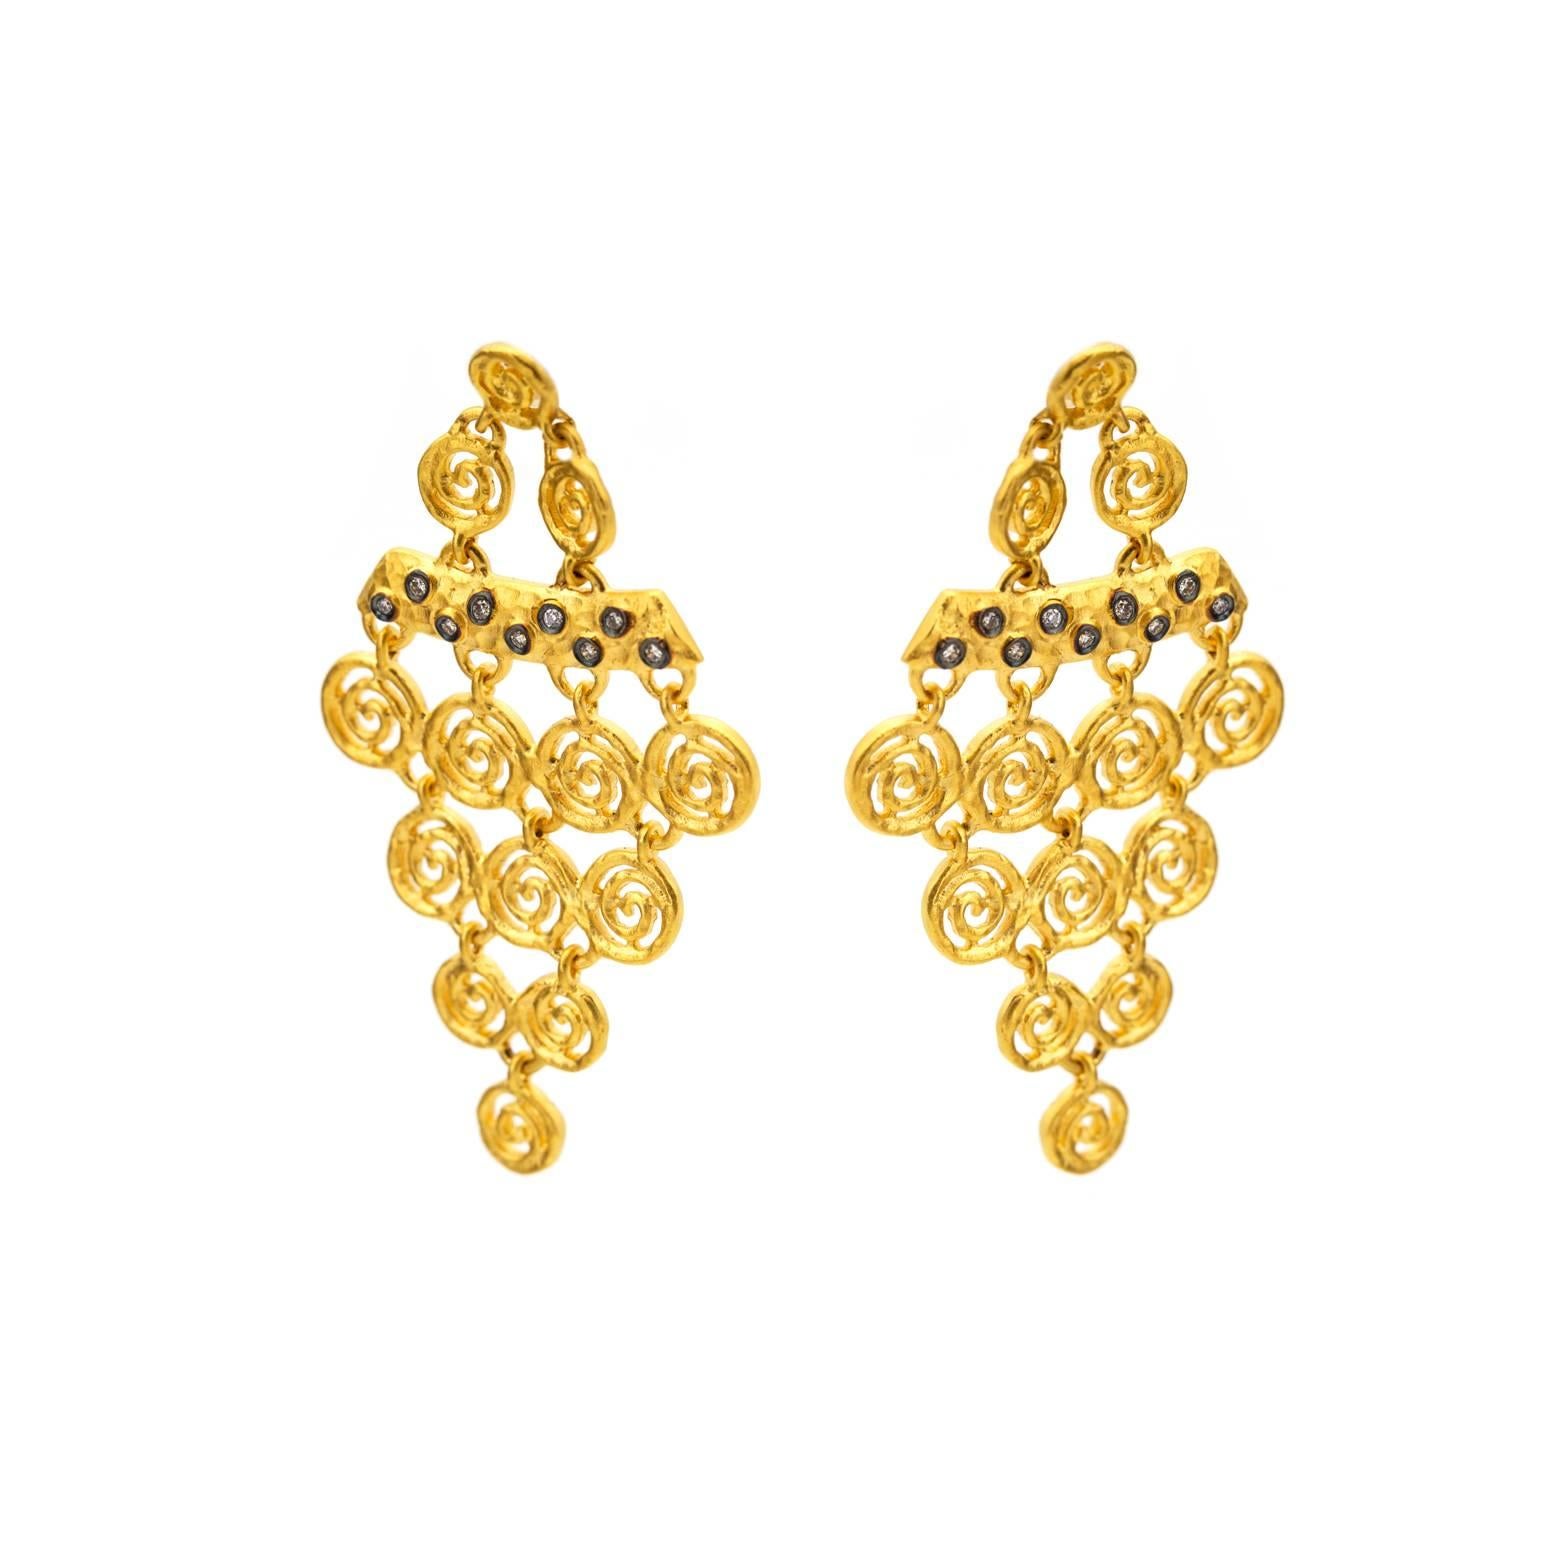 Romantic Gold Vermiel Spiral and Diamond Earrings with Post Backs